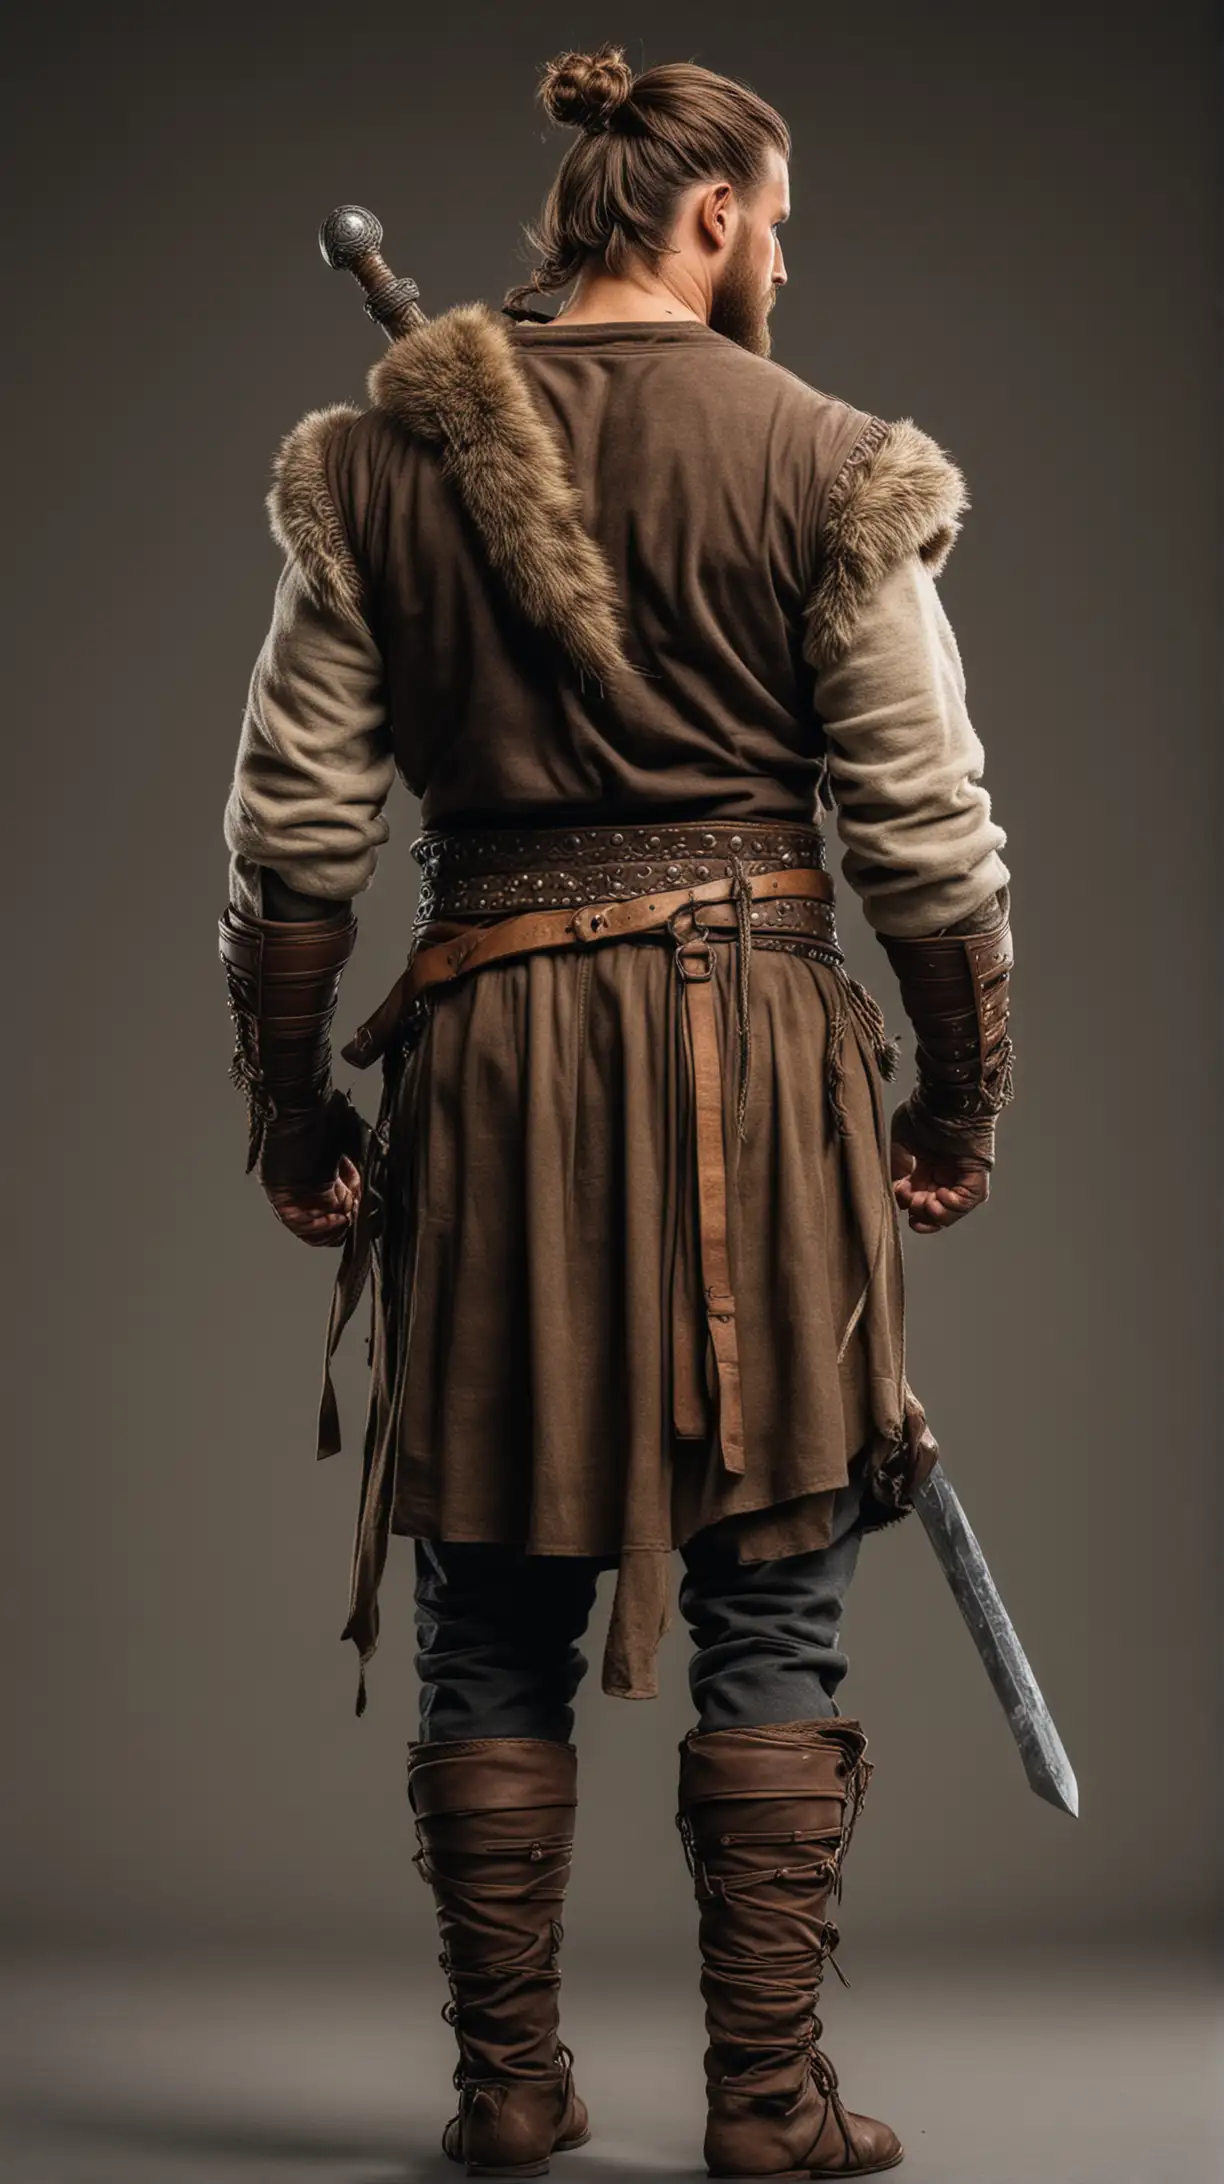 Muscular Viking Warrior with High Tied Man Bun and Fur Sleeves